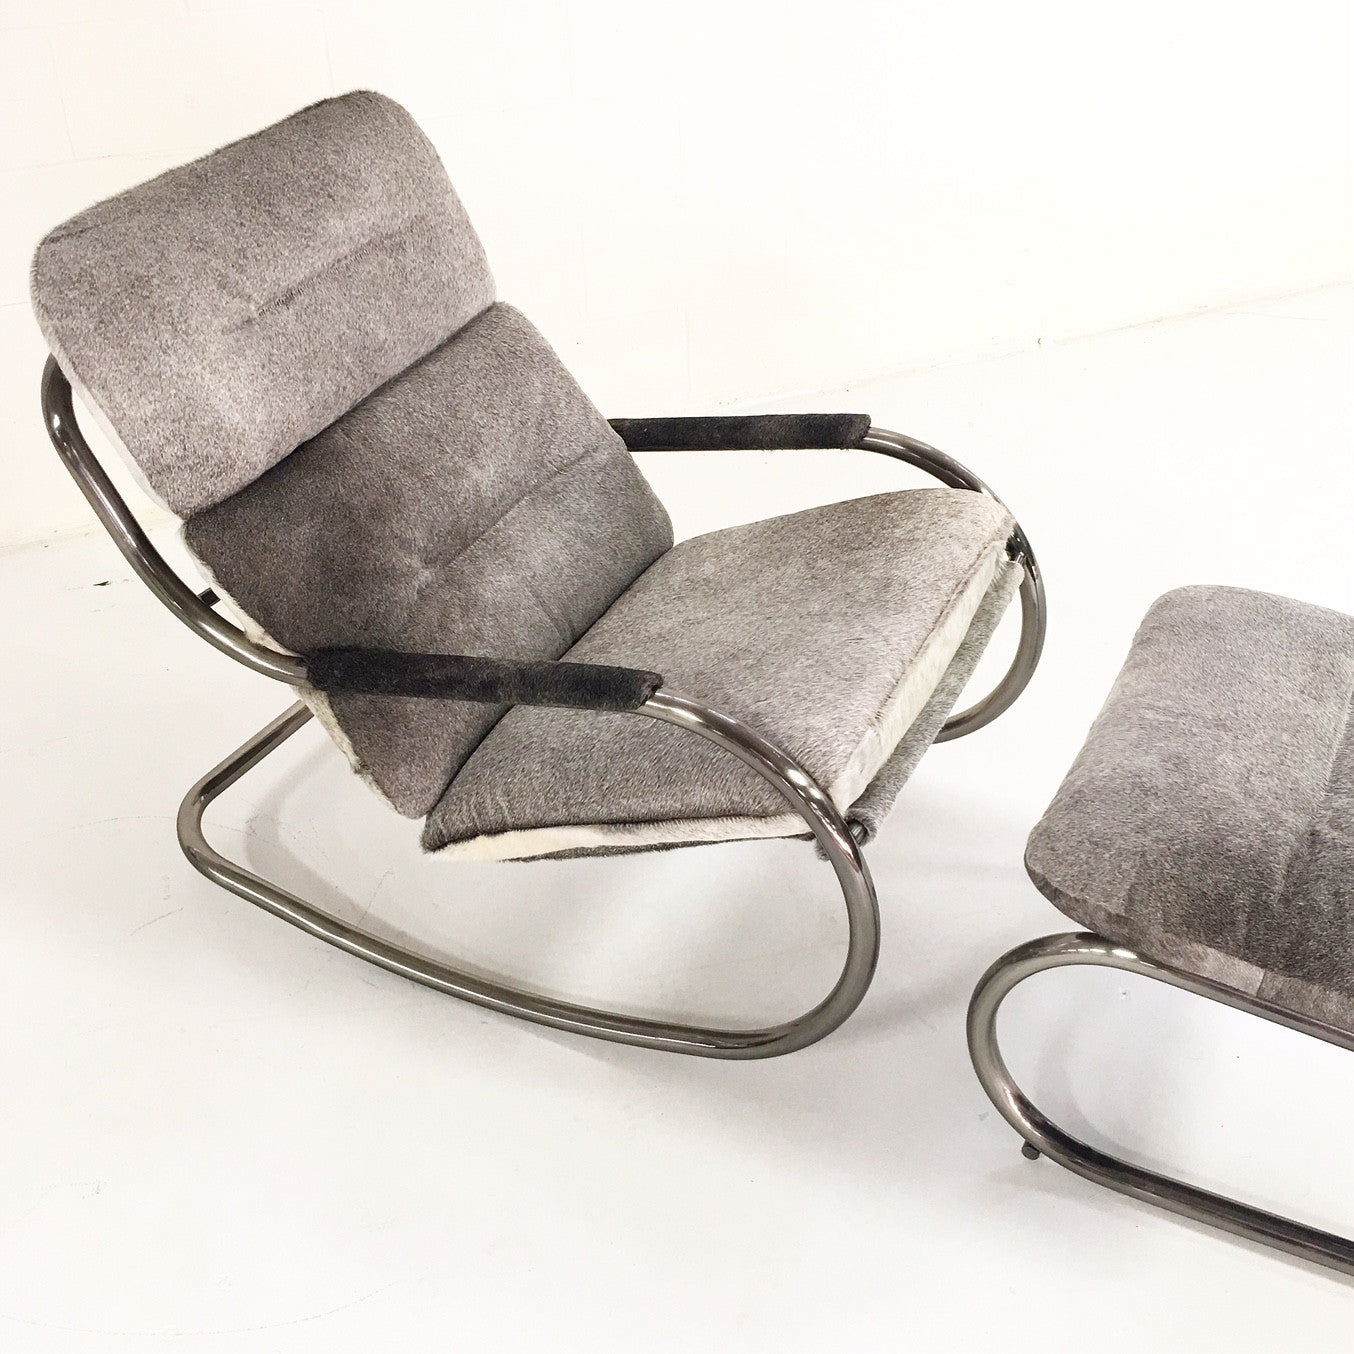 Rocking Lounge Chair & Ottoman in Brazilian Cowhide - FORSYTH